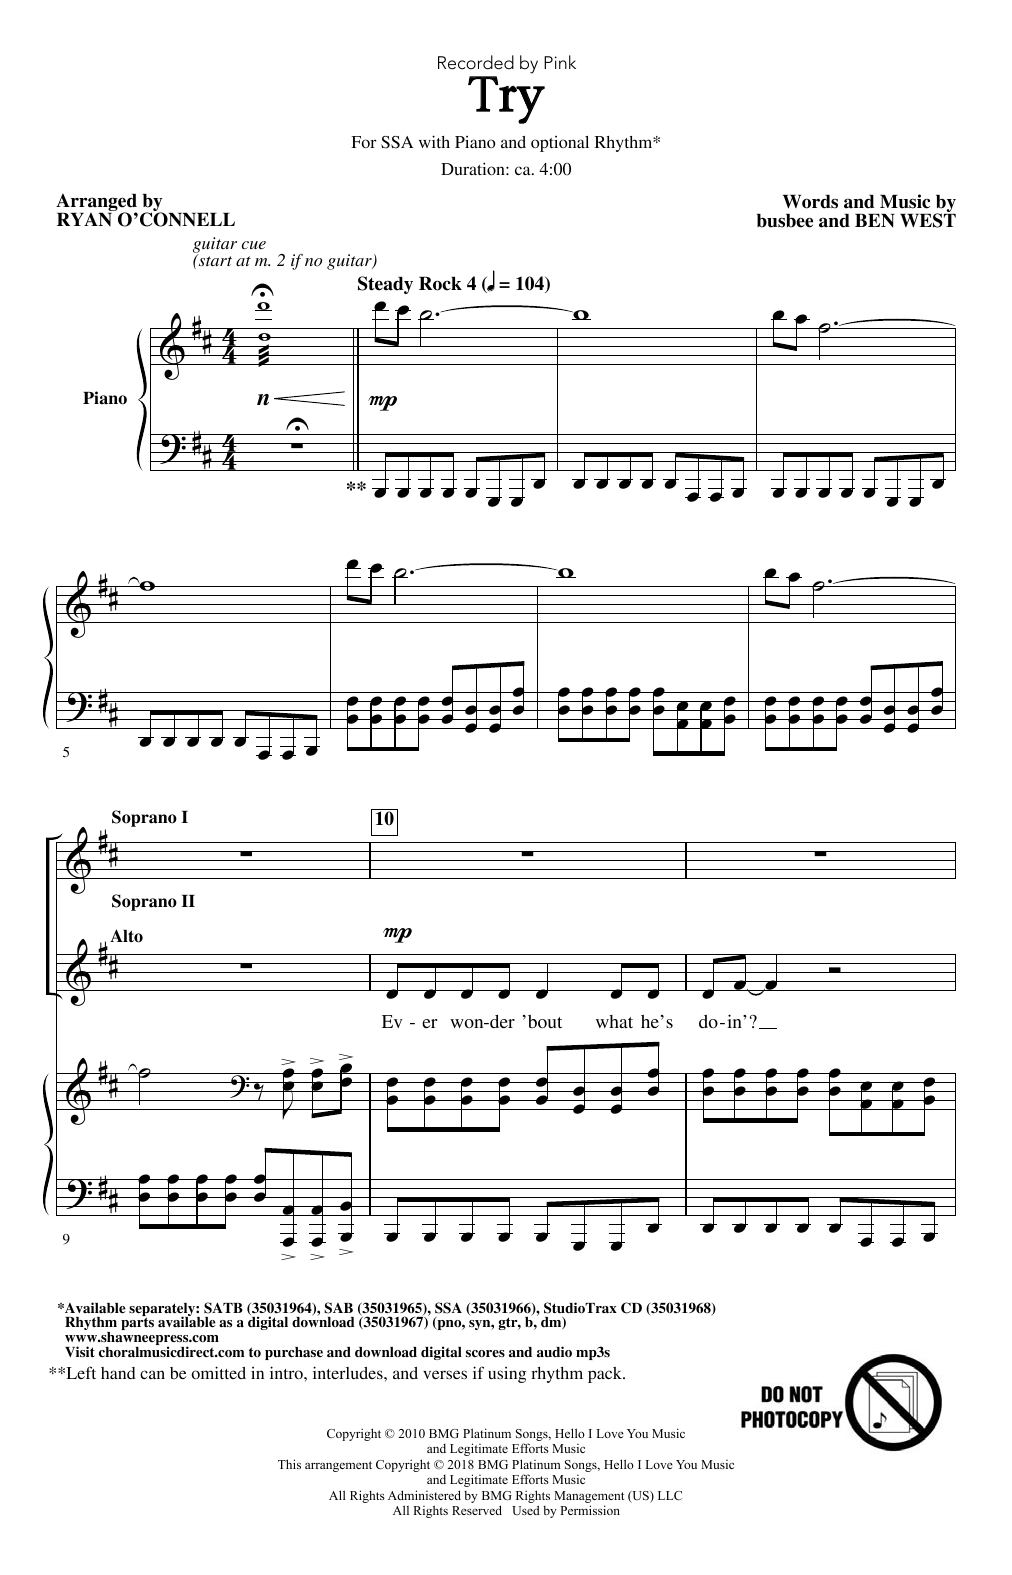 Download Ryan O'Connell Try Sheet Music